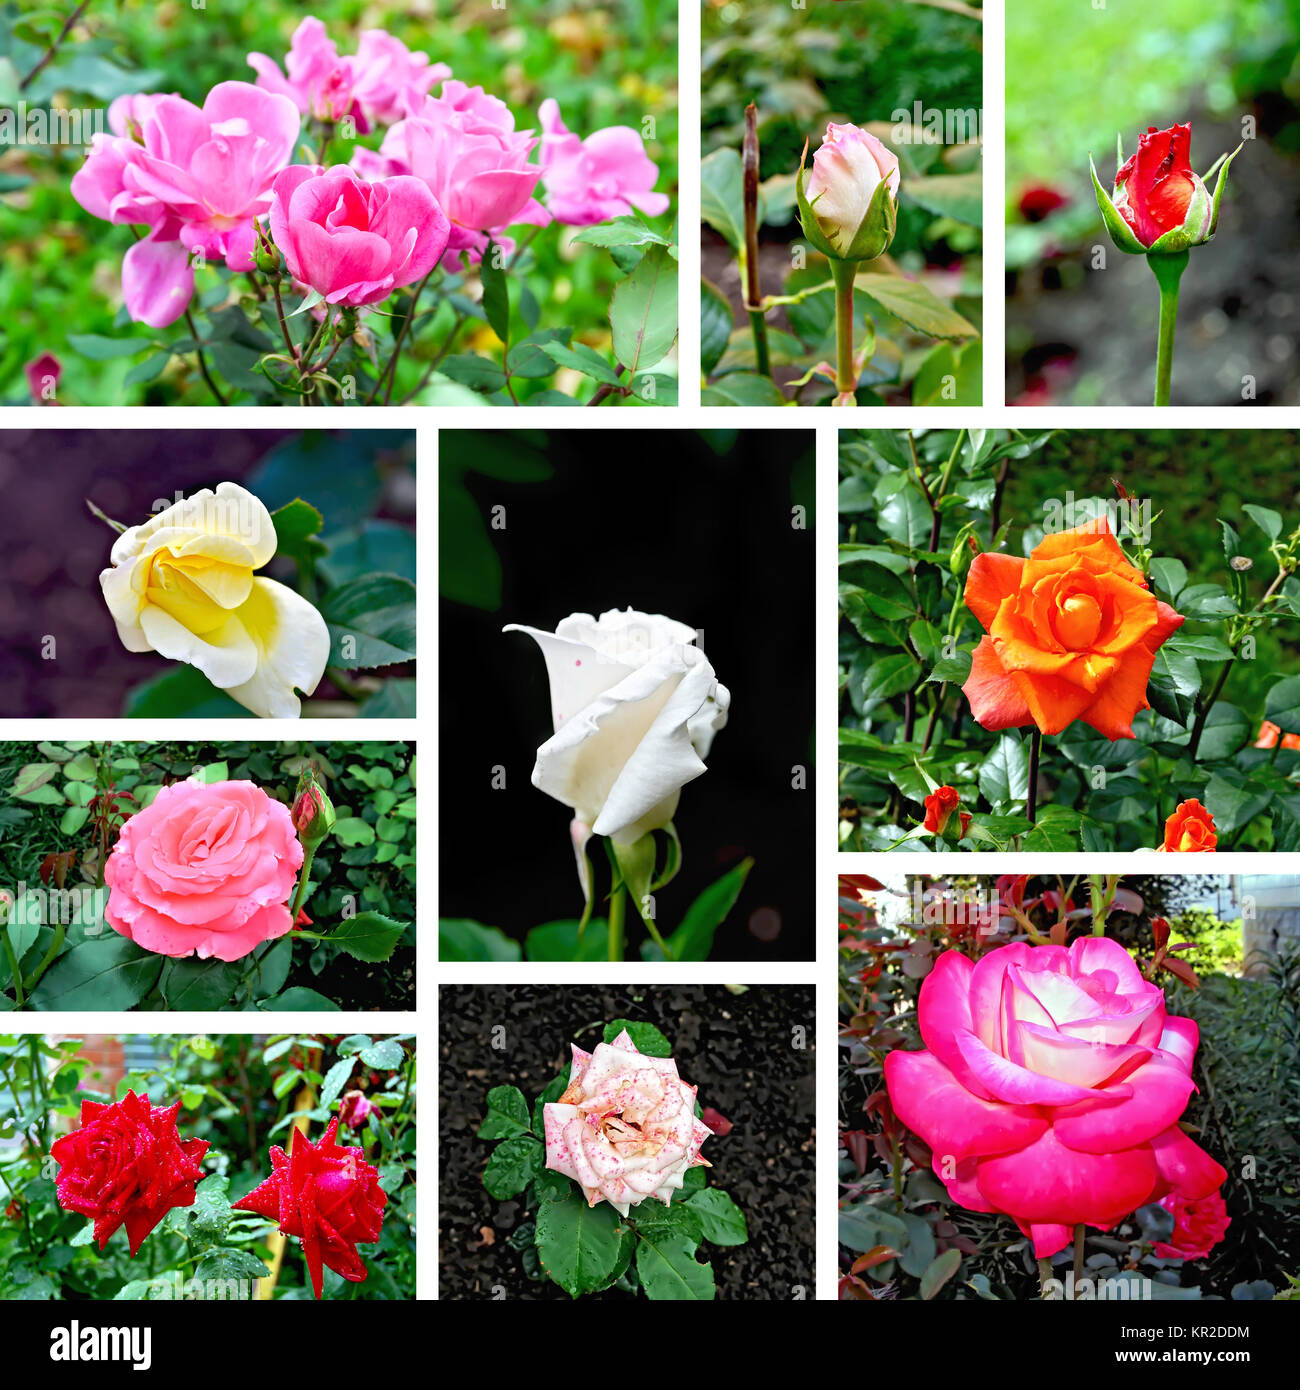 Roses different set of pictures Stock Photo